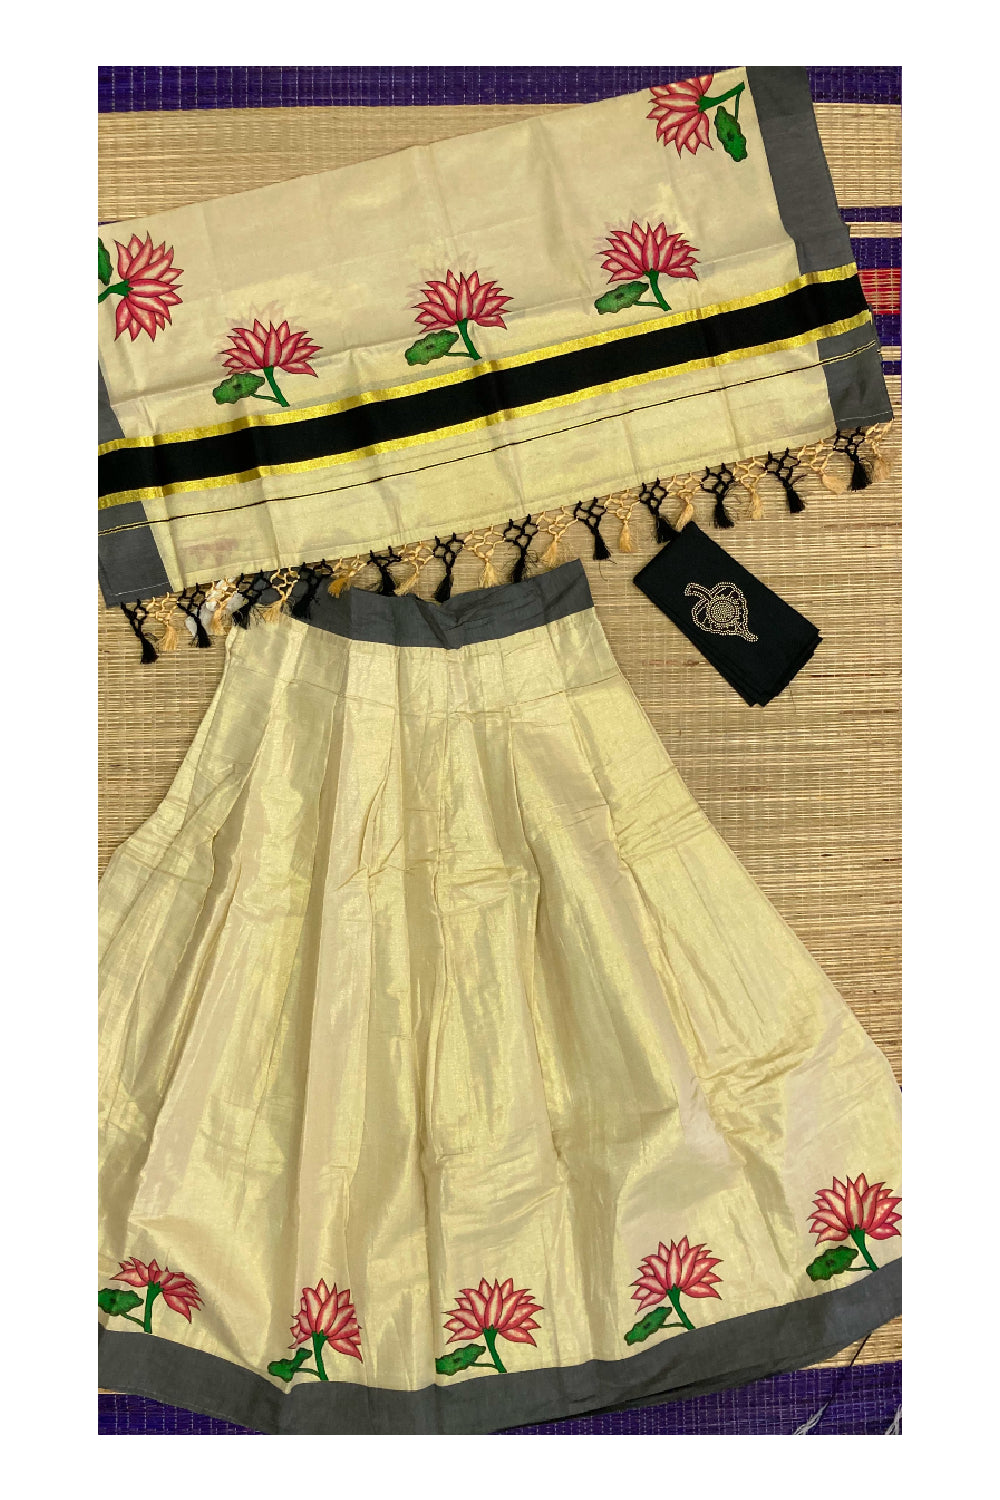 Kerala Tissue Stitched Dhavani Set with Black Blouse Piece and Neriyathu in with Floral Mural Work